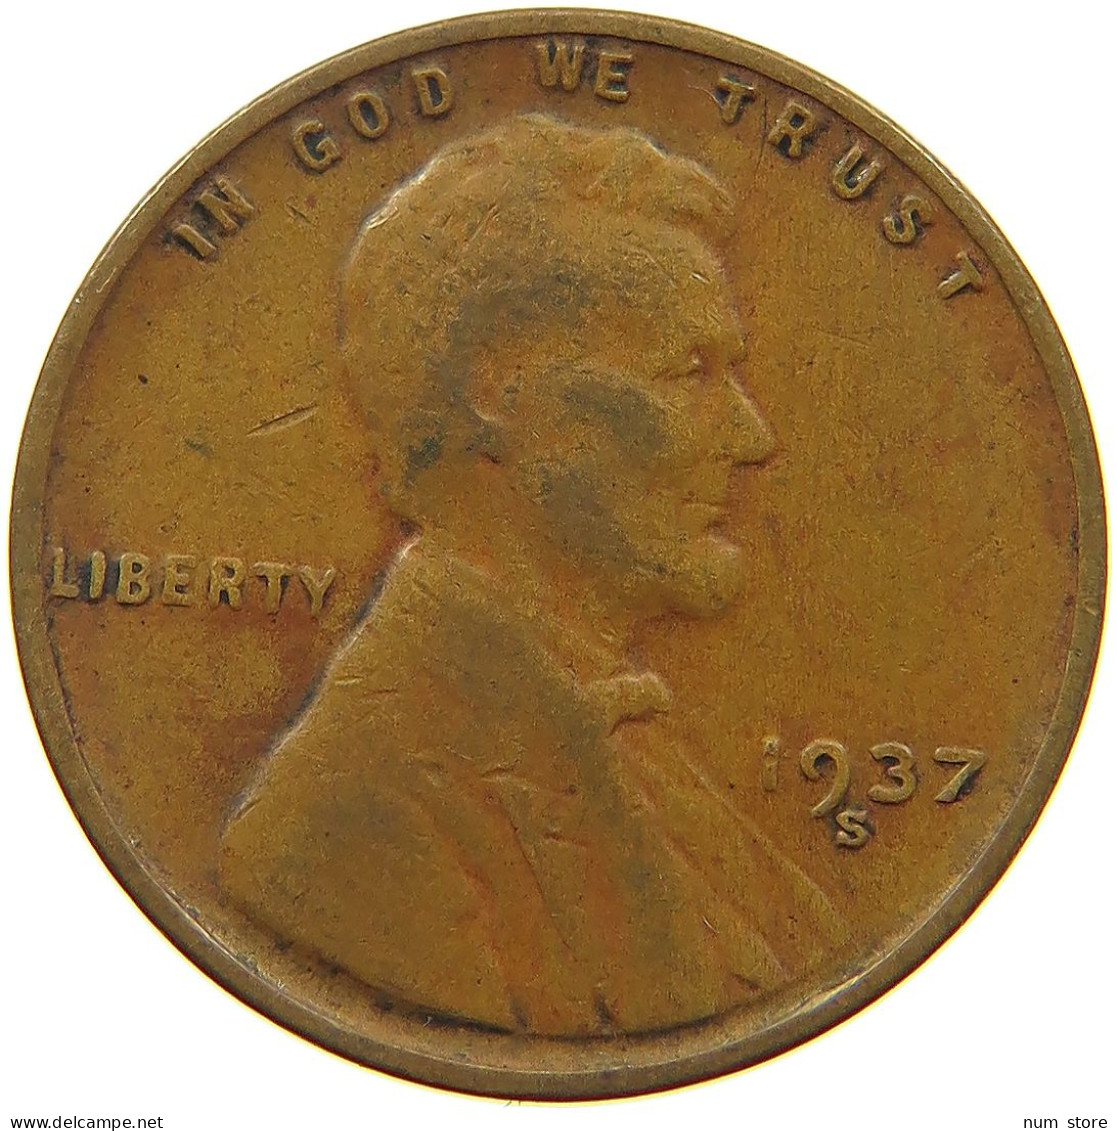 UNITED STATES OF AMERICA CENT 1937 S LINCOLN WHEAT #s063 0737 - 1909-1958: Lincoln, Wheat Ears Reverse